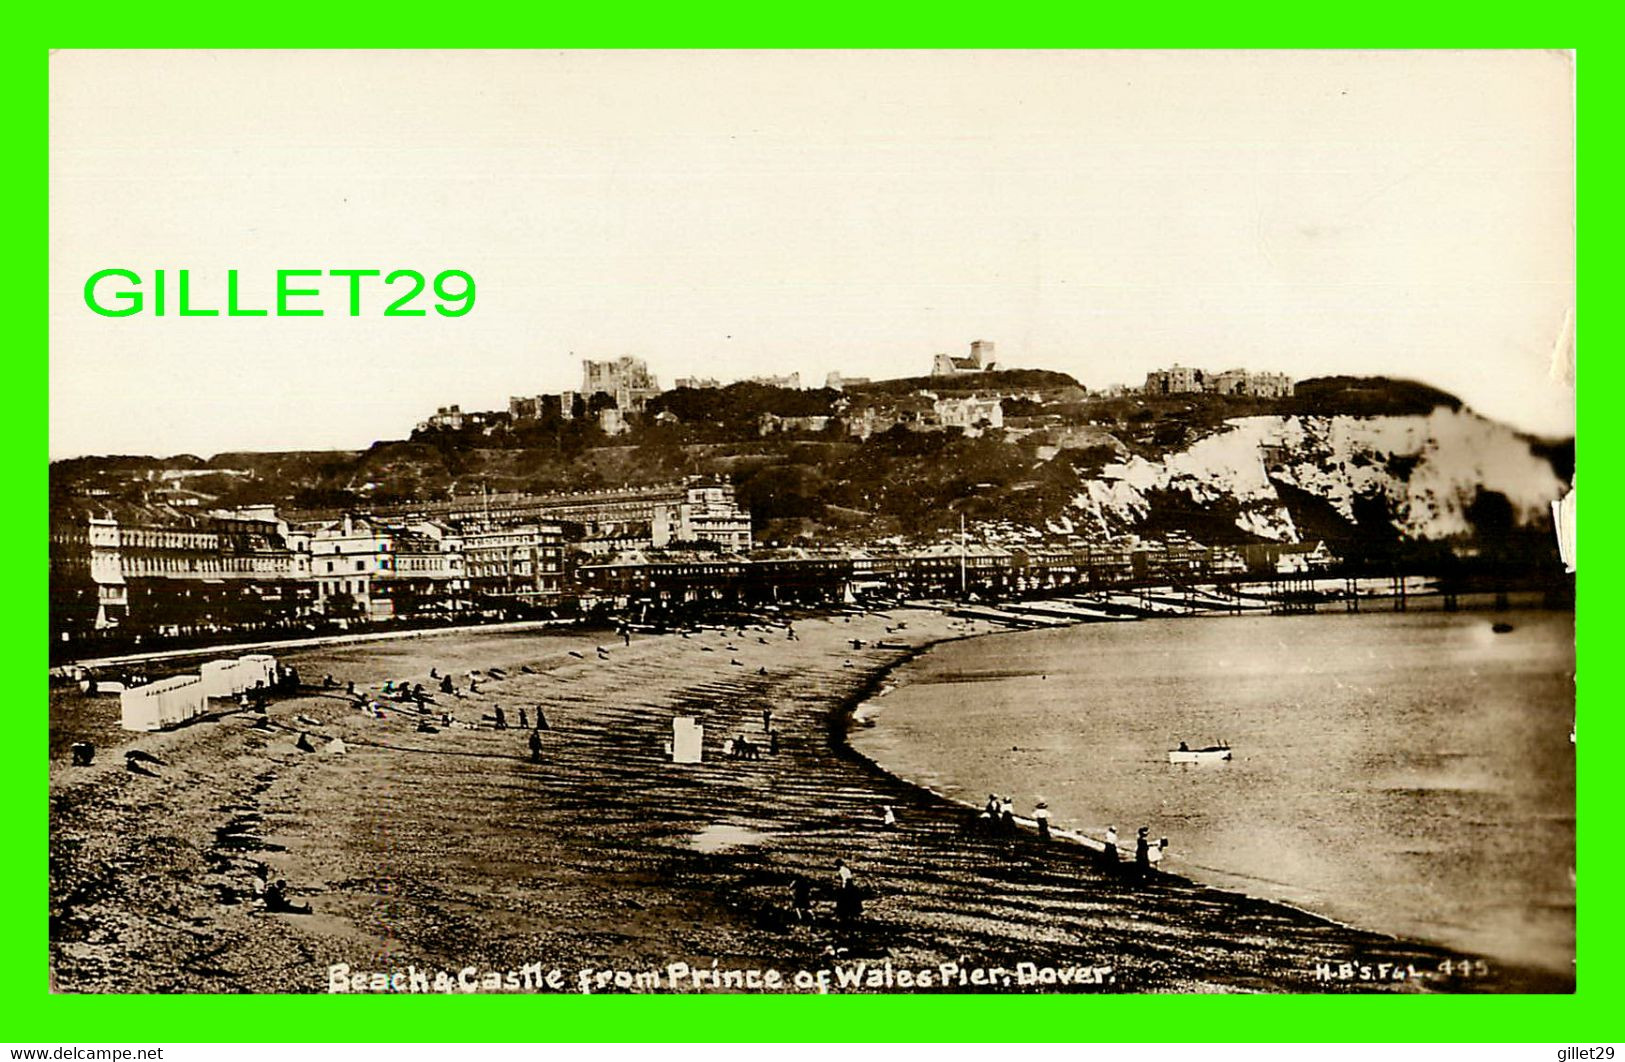 DOVER, UK - BEACH & CASTLE FROM PRINCE OF WALES PIER - ANIMATED WITH PEOPLES - H. B. F & L - REAL PHOTO POST CARD - - Dover